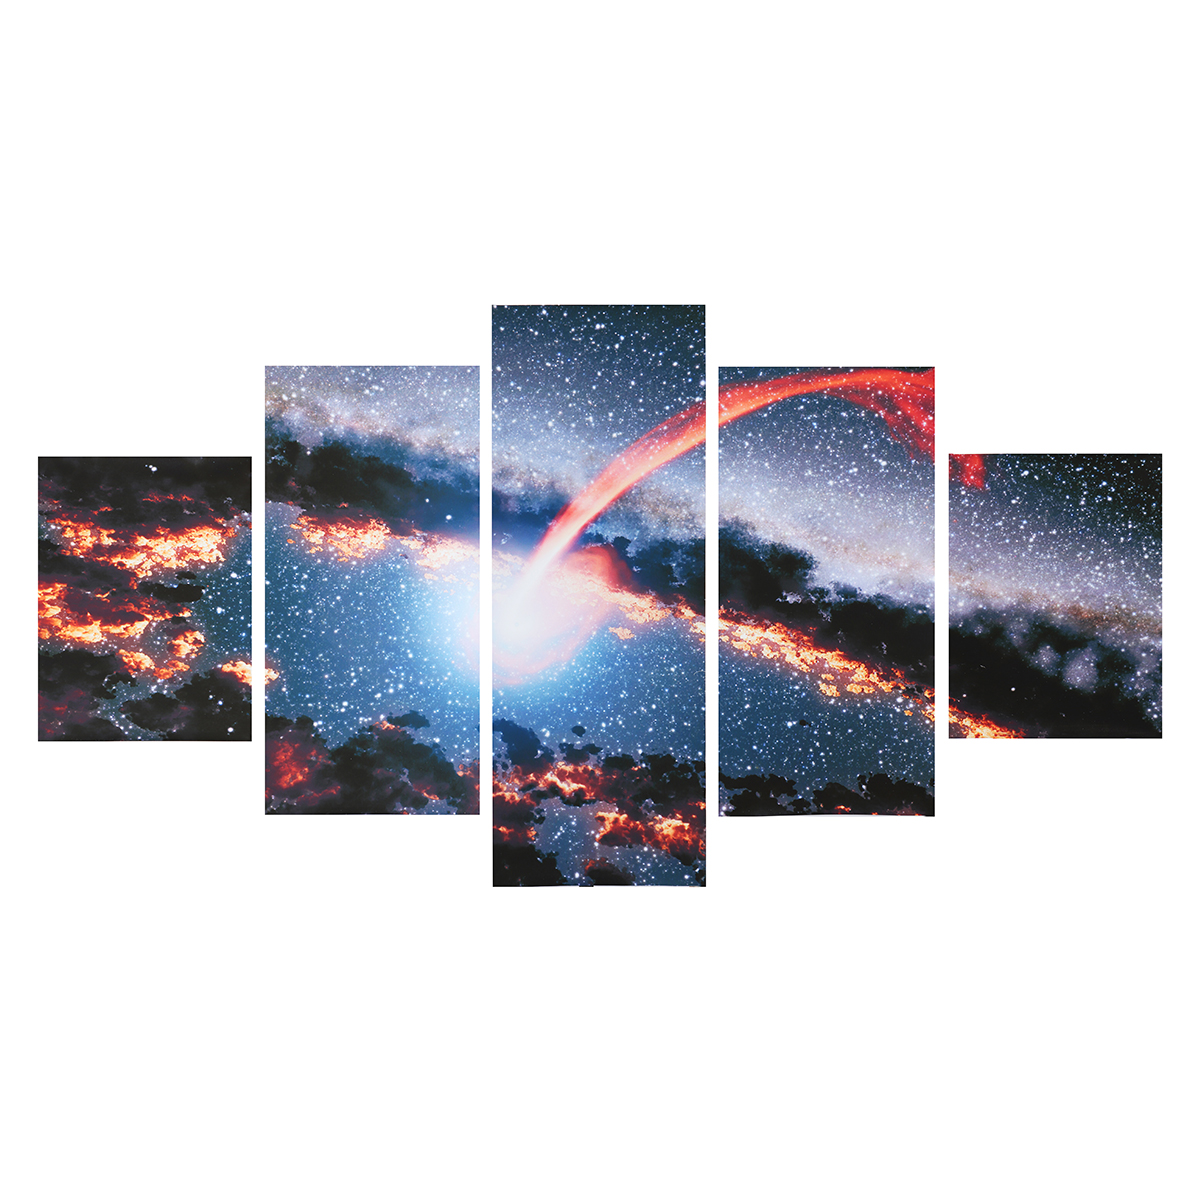 5Pcs-Canvas-Painting-Starry-Sky-Wall-Decorative-Print-Art-Pictures-Frameless-Wall-Hanging-Home-Offic-1803048-4